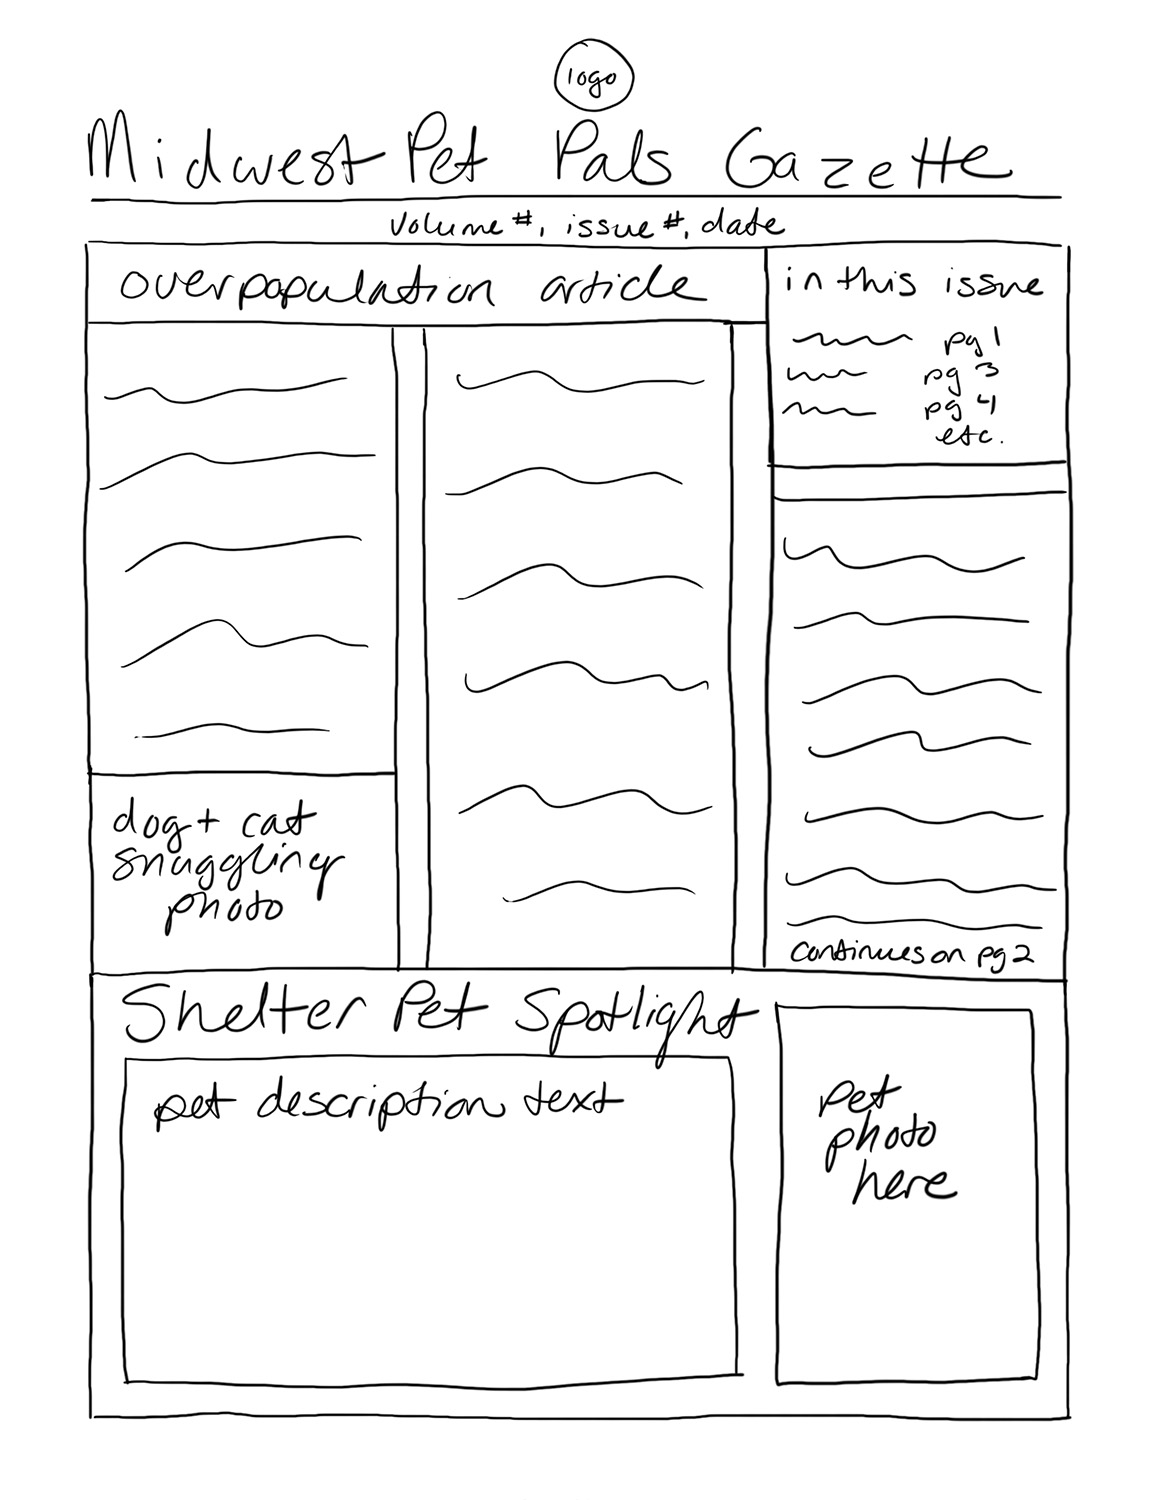 Rough sketch of the first page of the newsletter. The newsletter's name is across the top of the page. The layout is split up into three columns of text, with a table of contents at the top of the third column of text on the right side. The main content of the page has the title "Overpopulation article", and consists of three columns of text and one image.  A sidebar article, Shelter Pet Spotlight, spans the bottom third of the page and consists of text and an image.